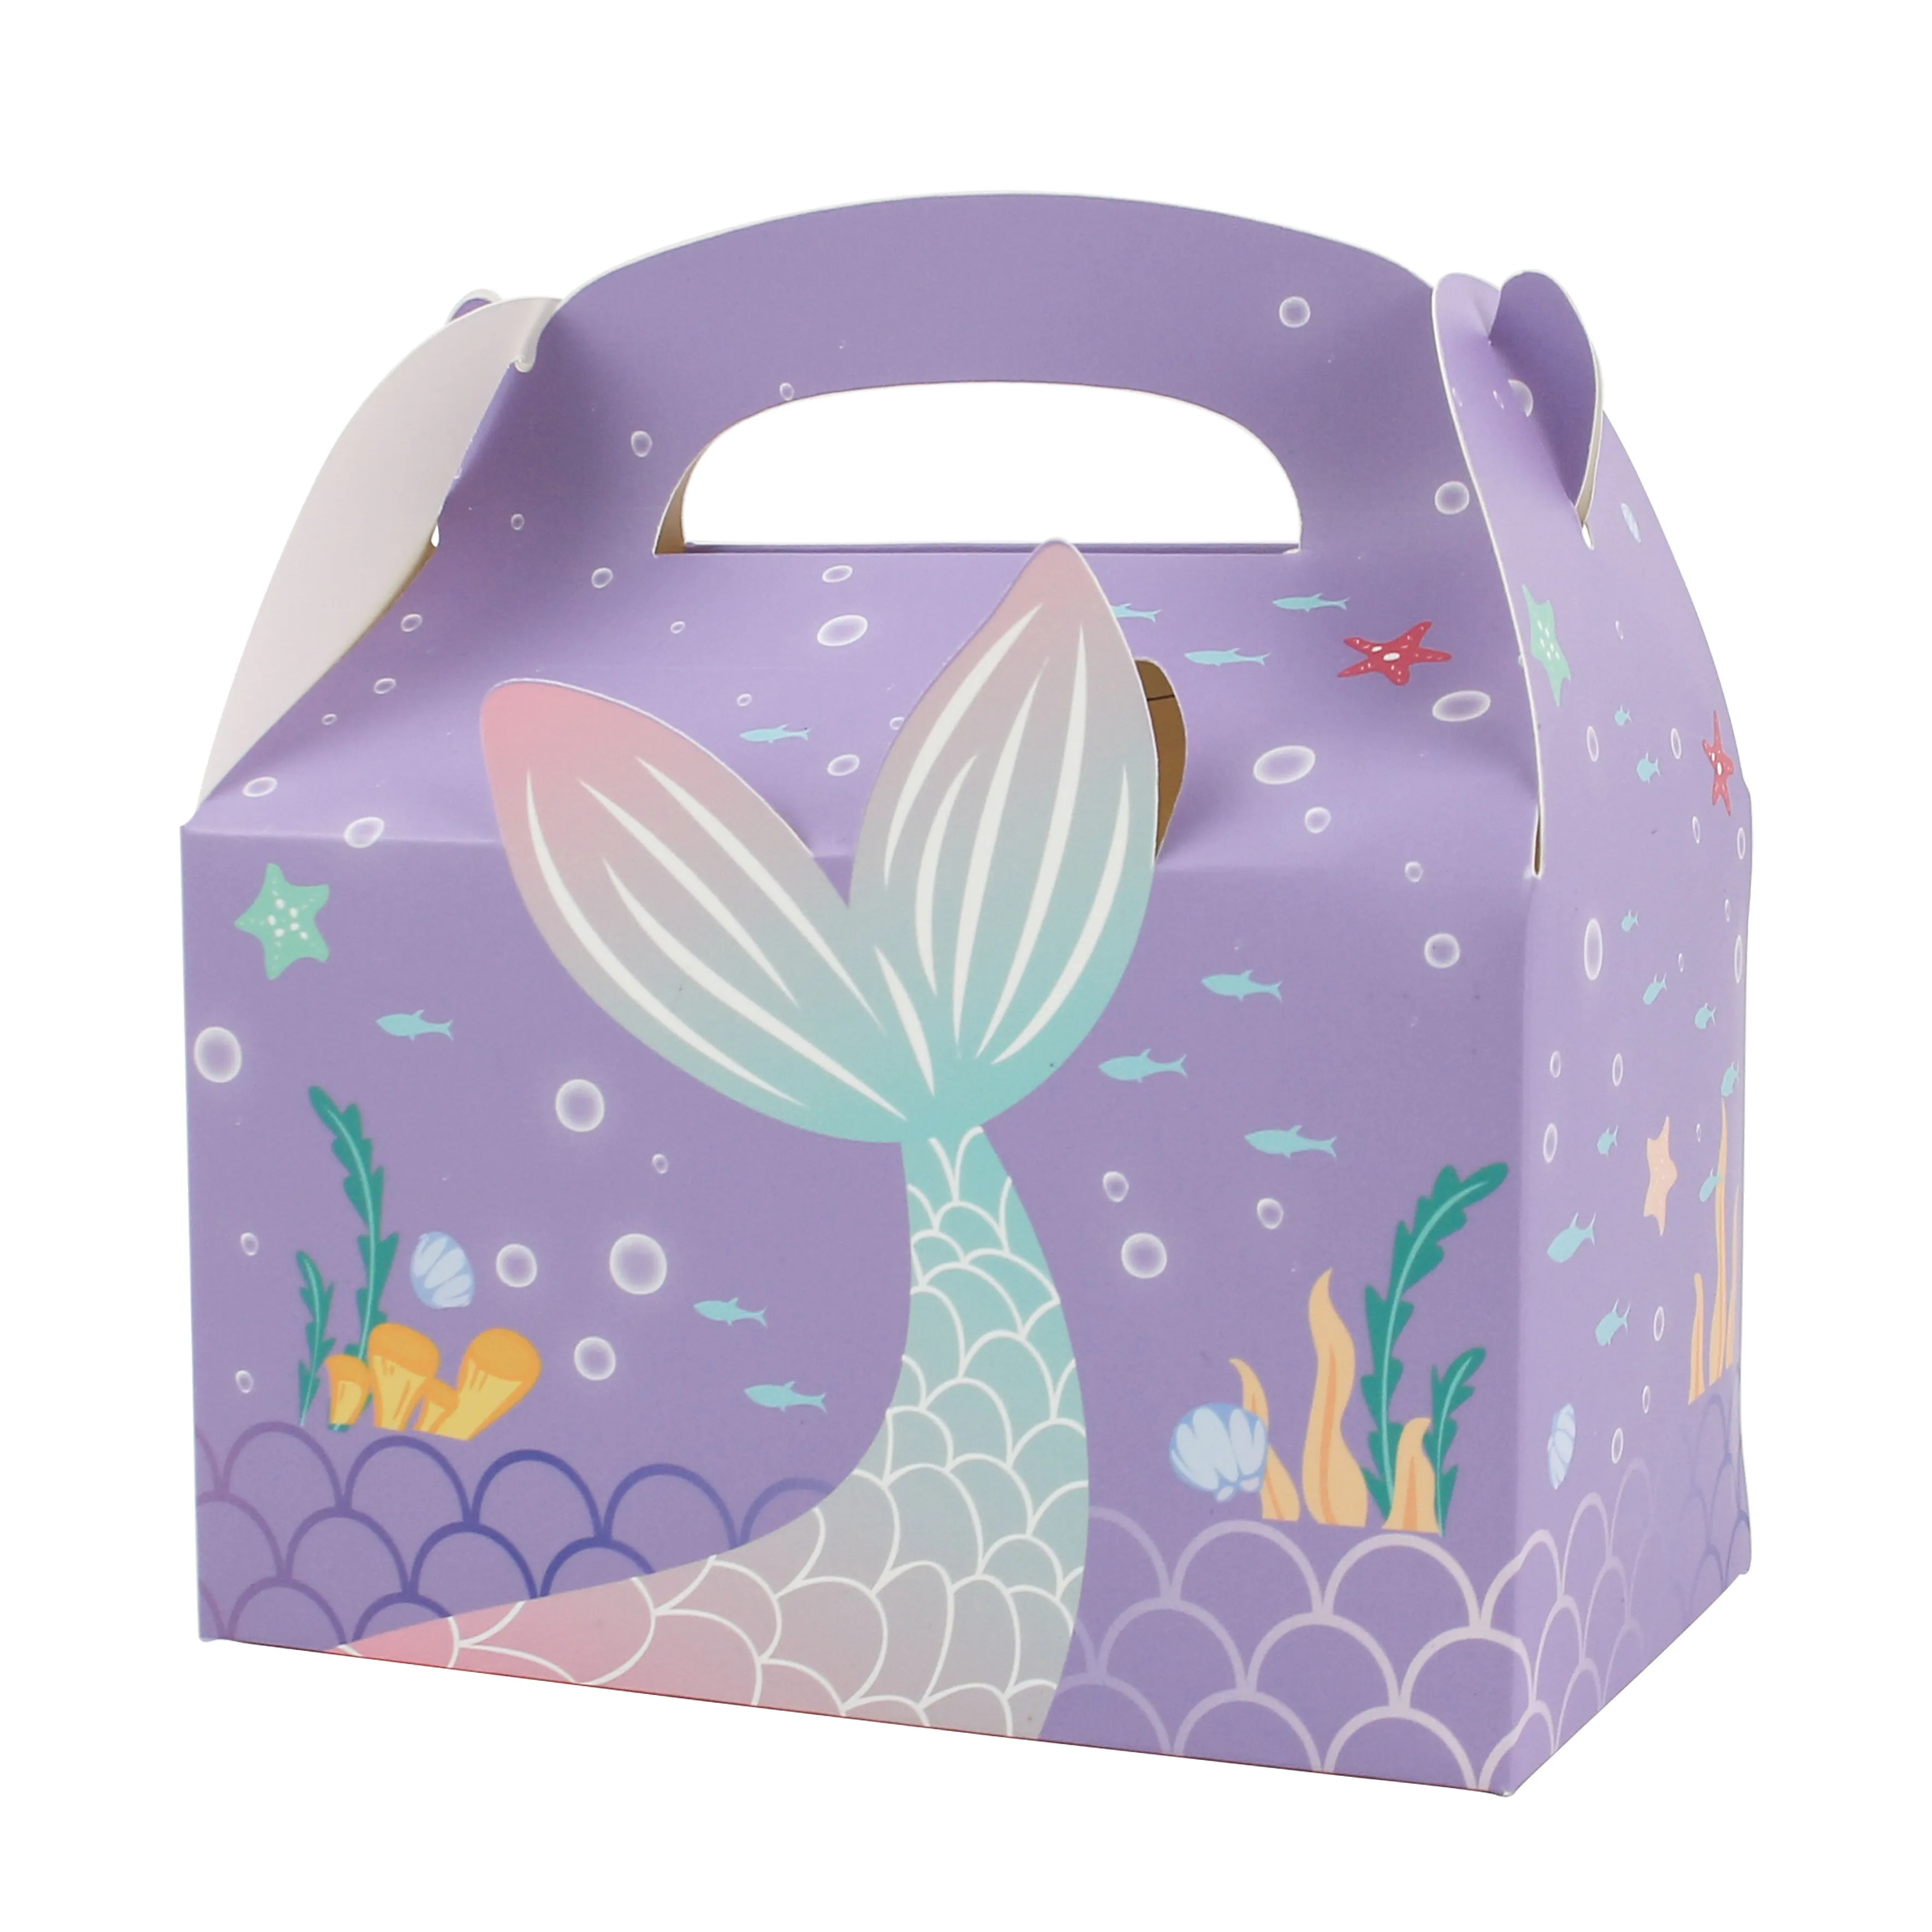 Newly Design mermaid Theme Custom Make Paper Bag Paper Food treatie cupcake gift Bag for Party Supplies